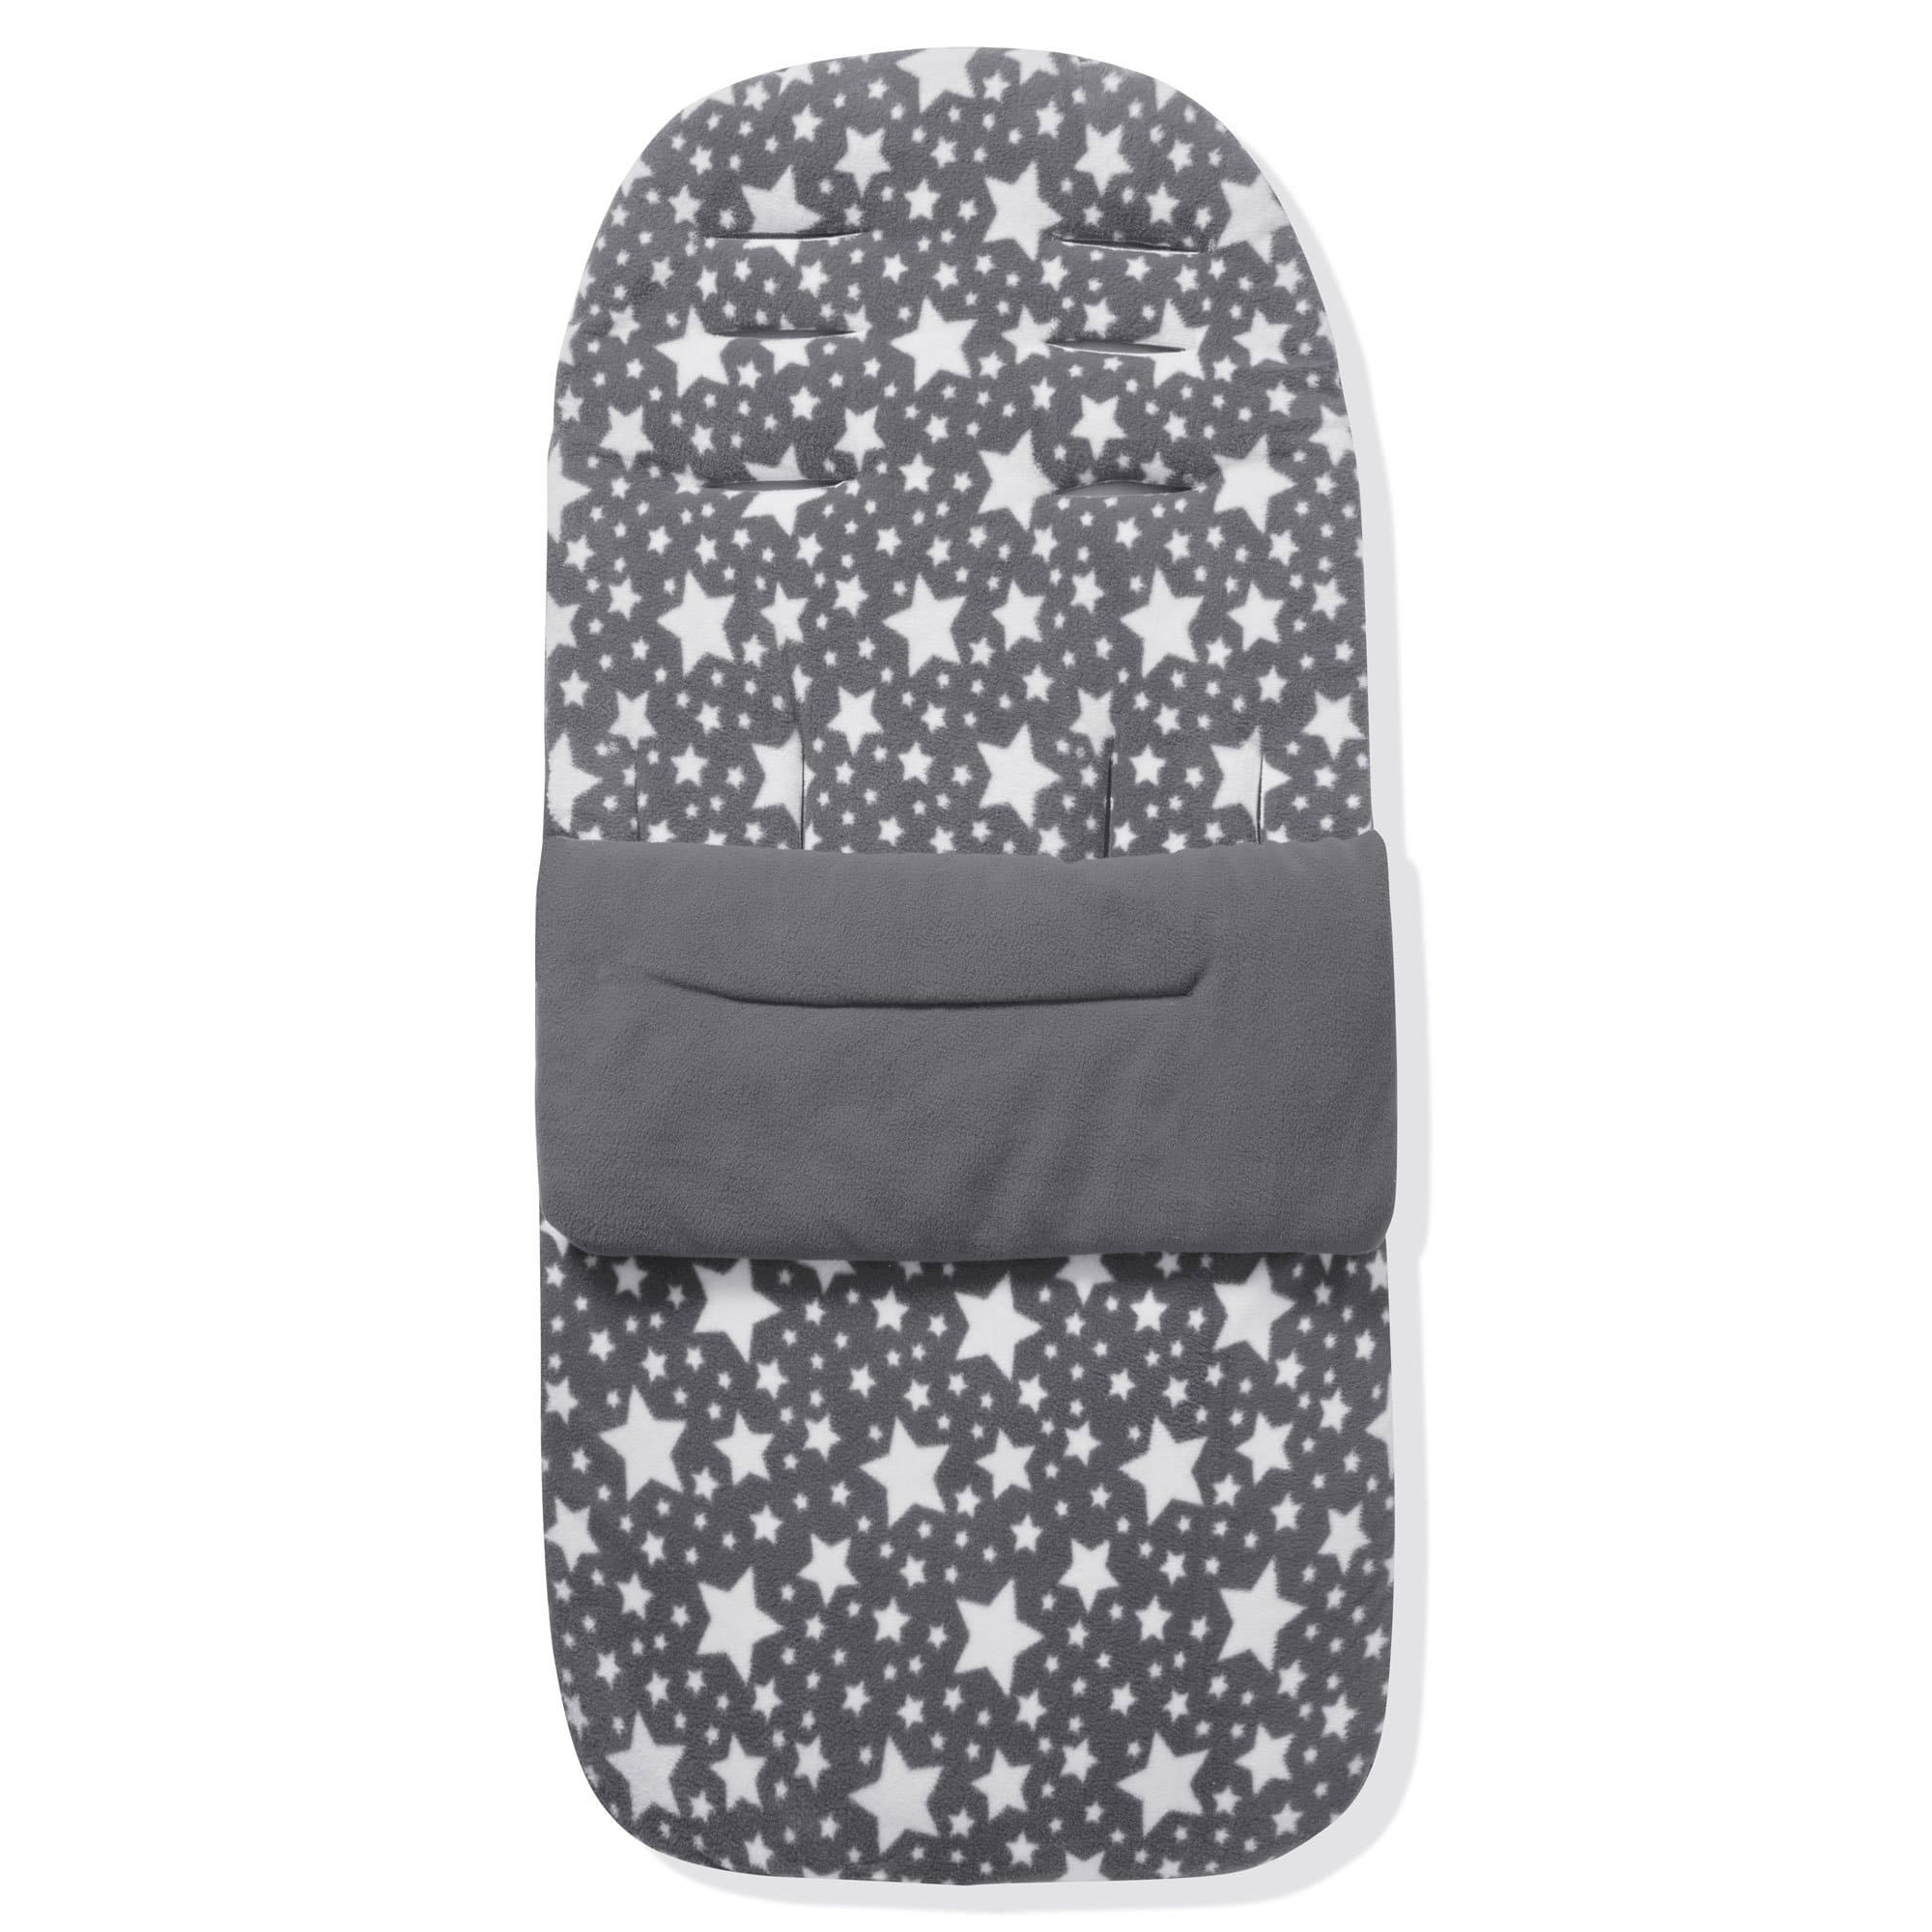 Fleece Footmuff / Cosy Toes Compatible with Mima - Grey Star / Fits All Models | For Your Little One